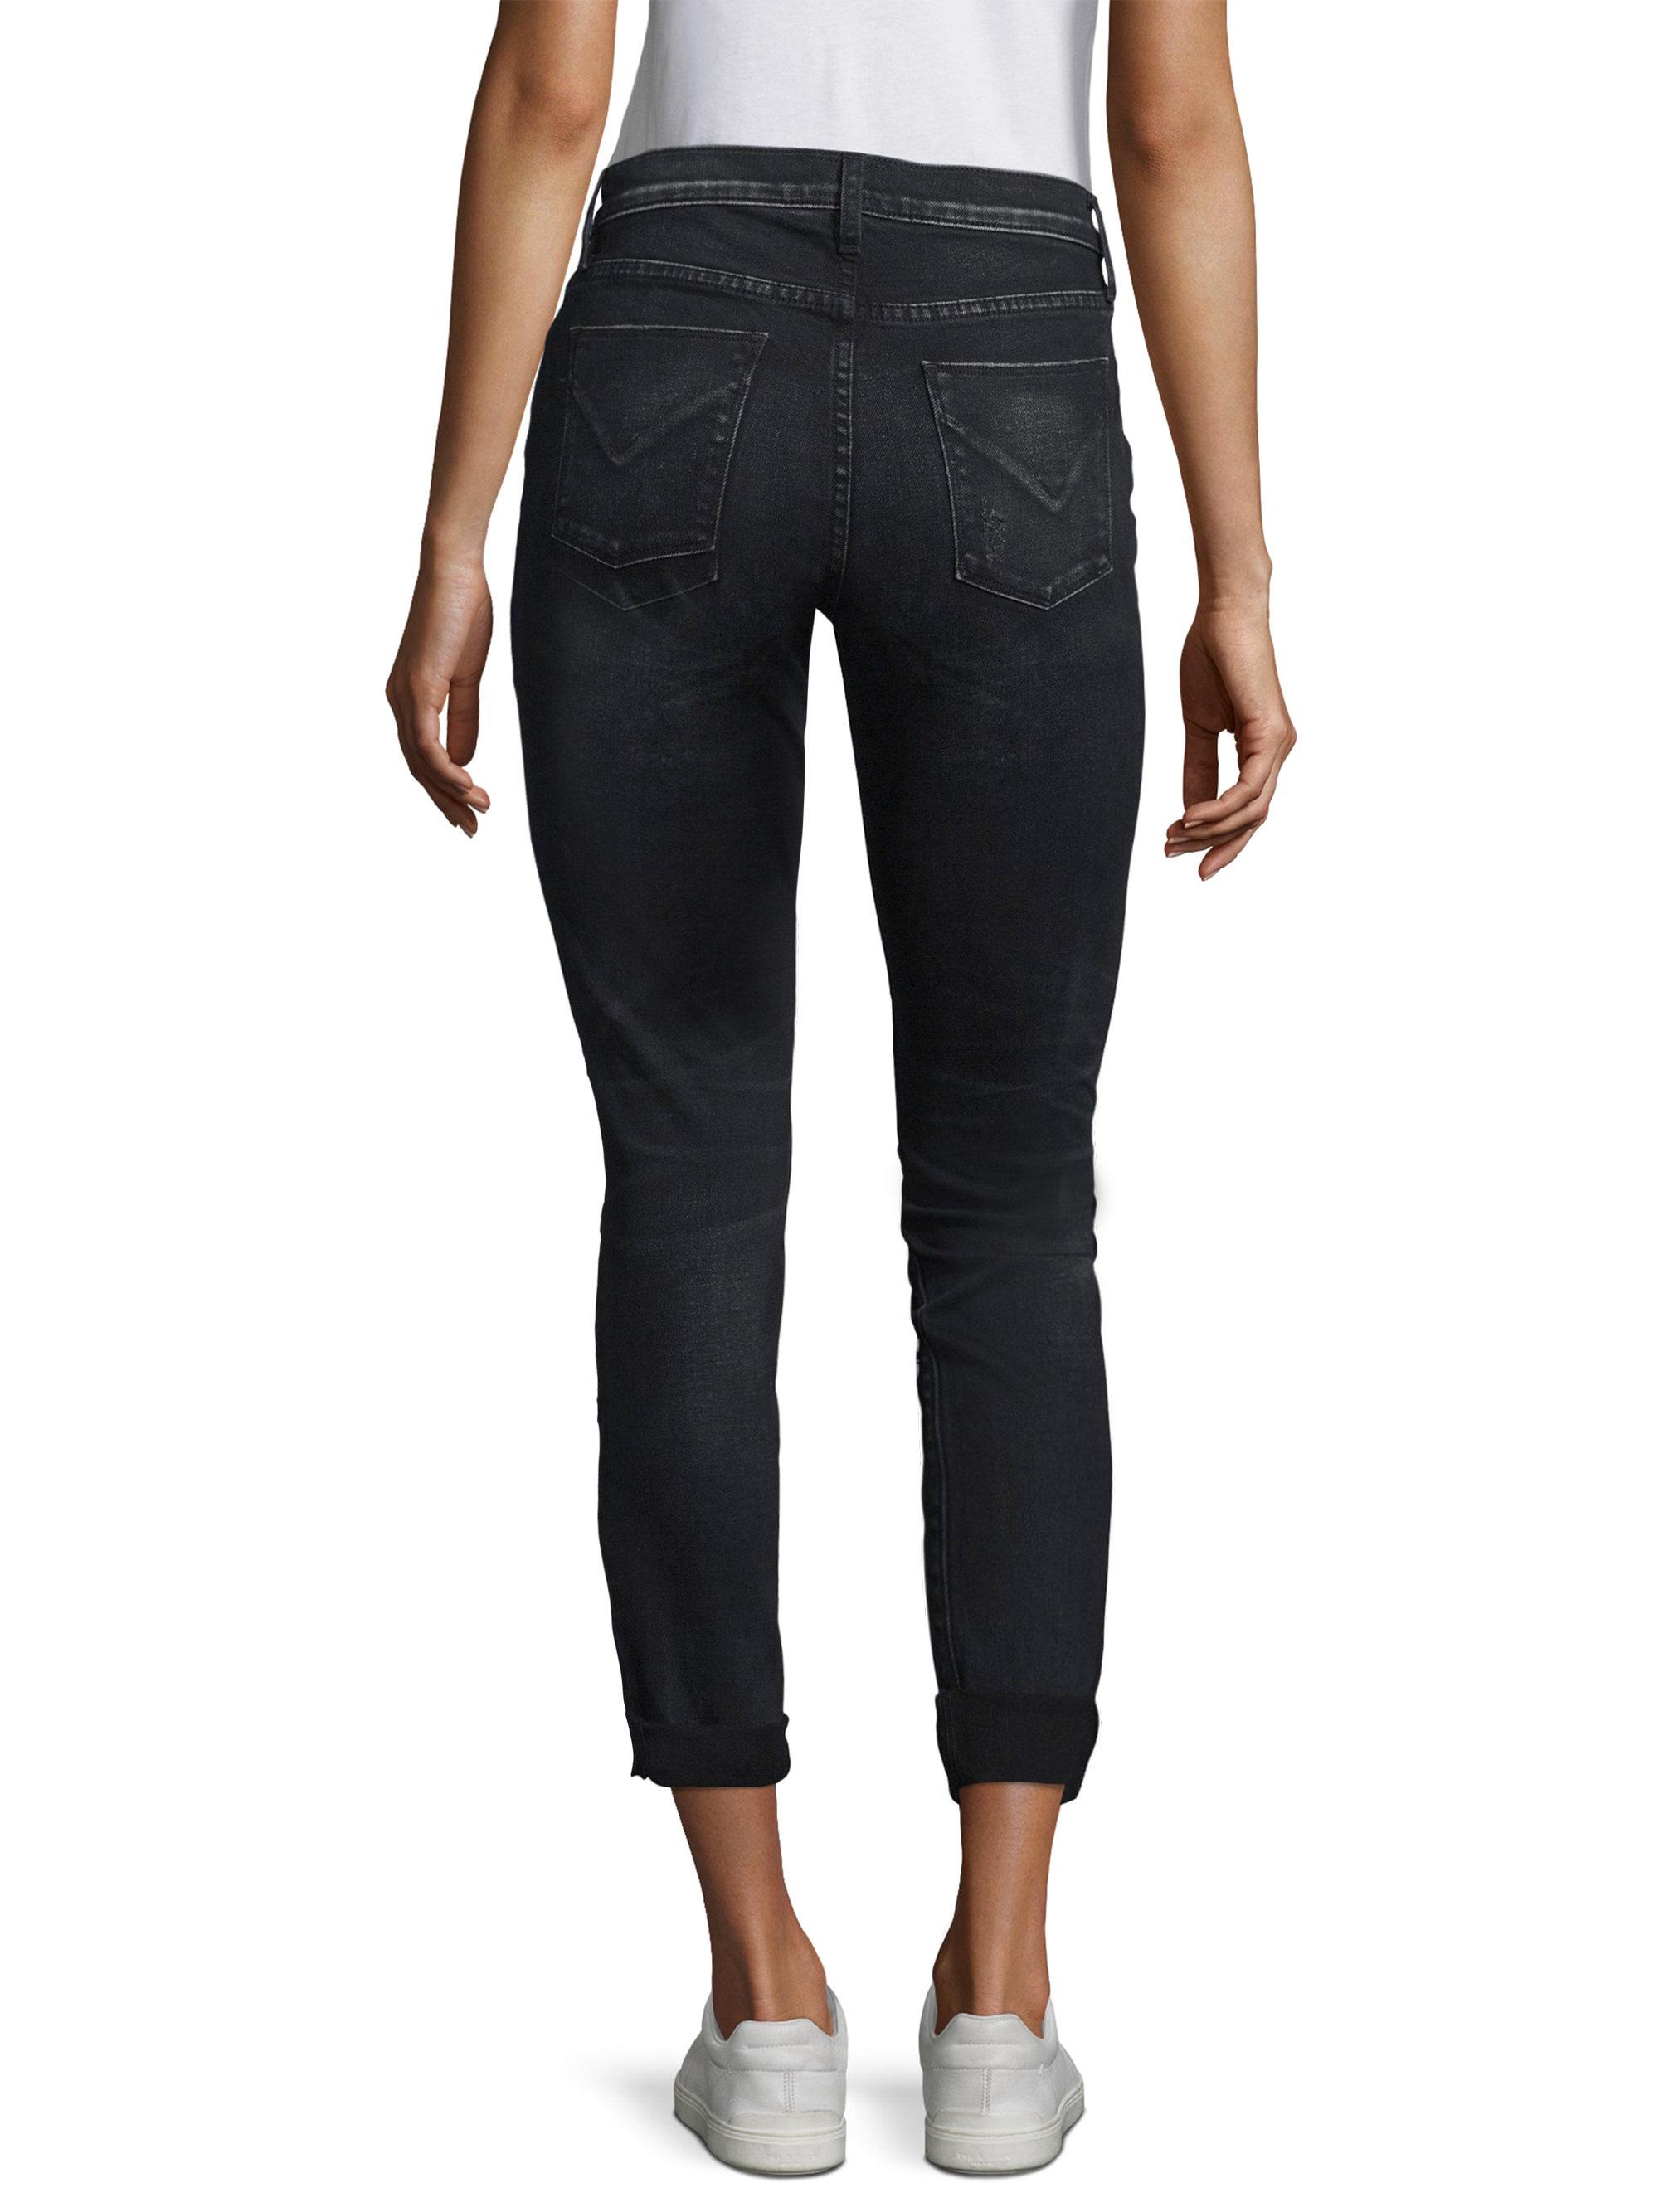 Hudson Jeans Denim Riley Relaxed Embellished Cropped Jeans in Black - Lyst